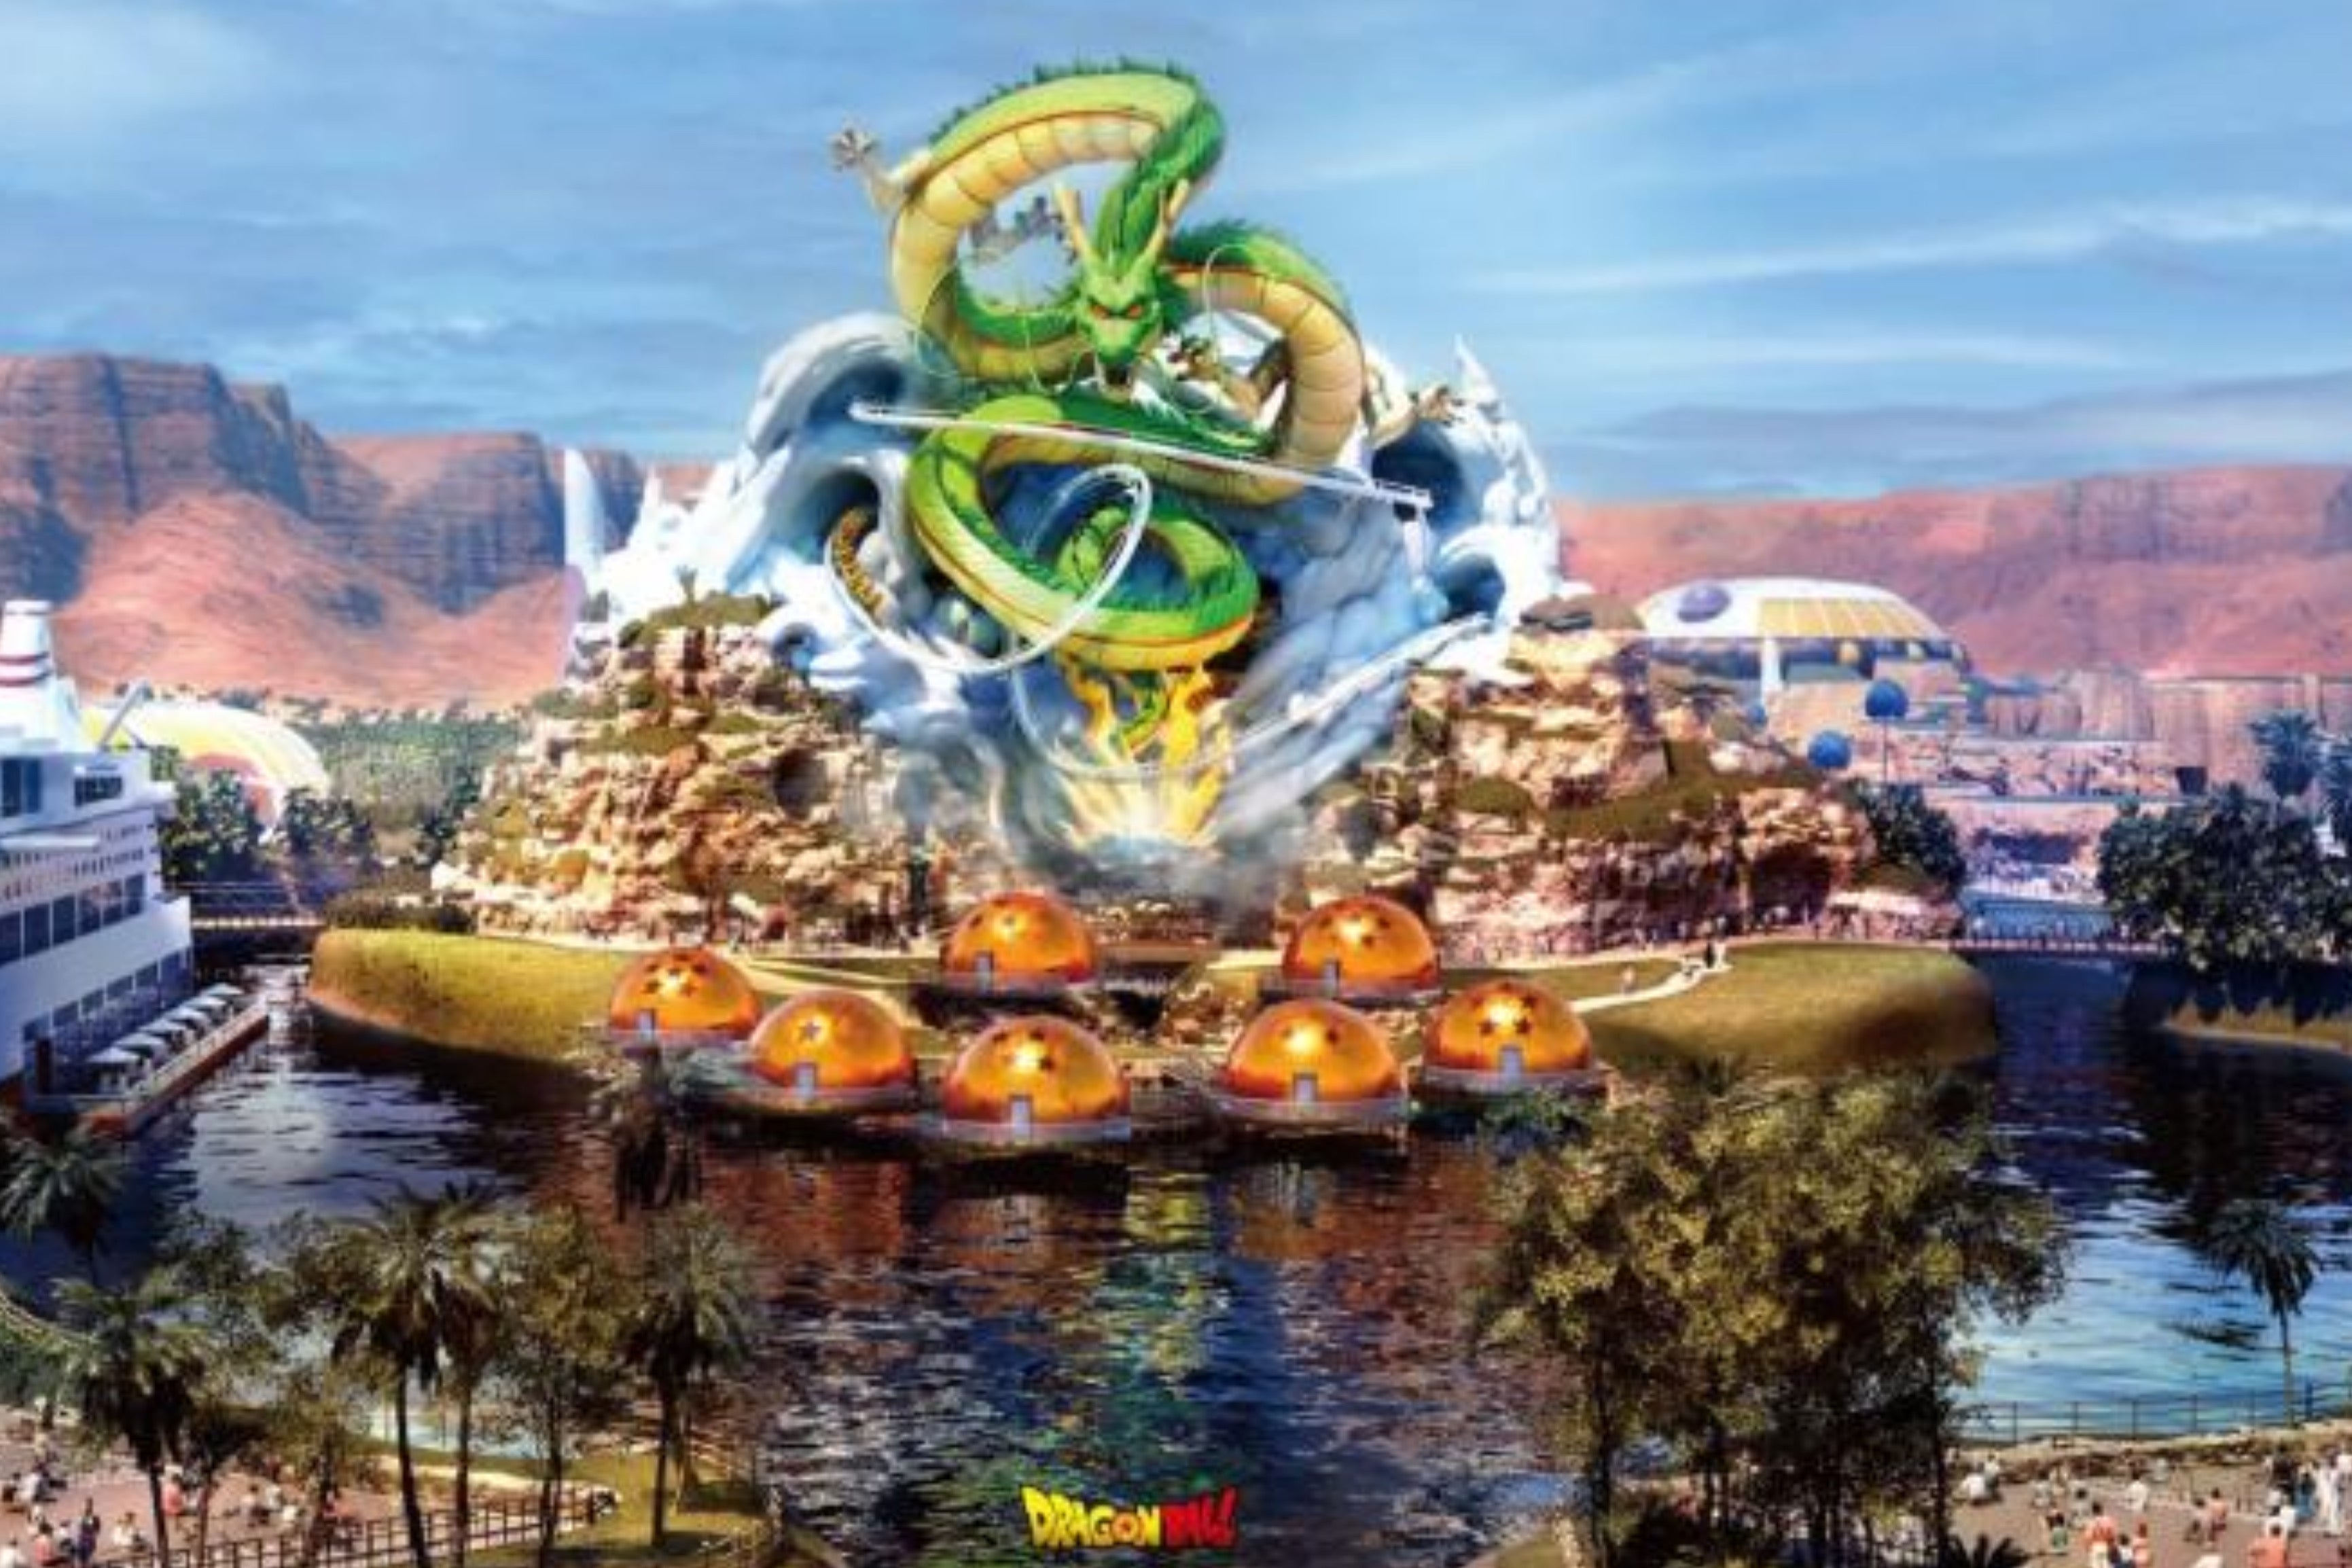 Dragon Ball: a theme park inspired by Toriyama's universe is coming soon!